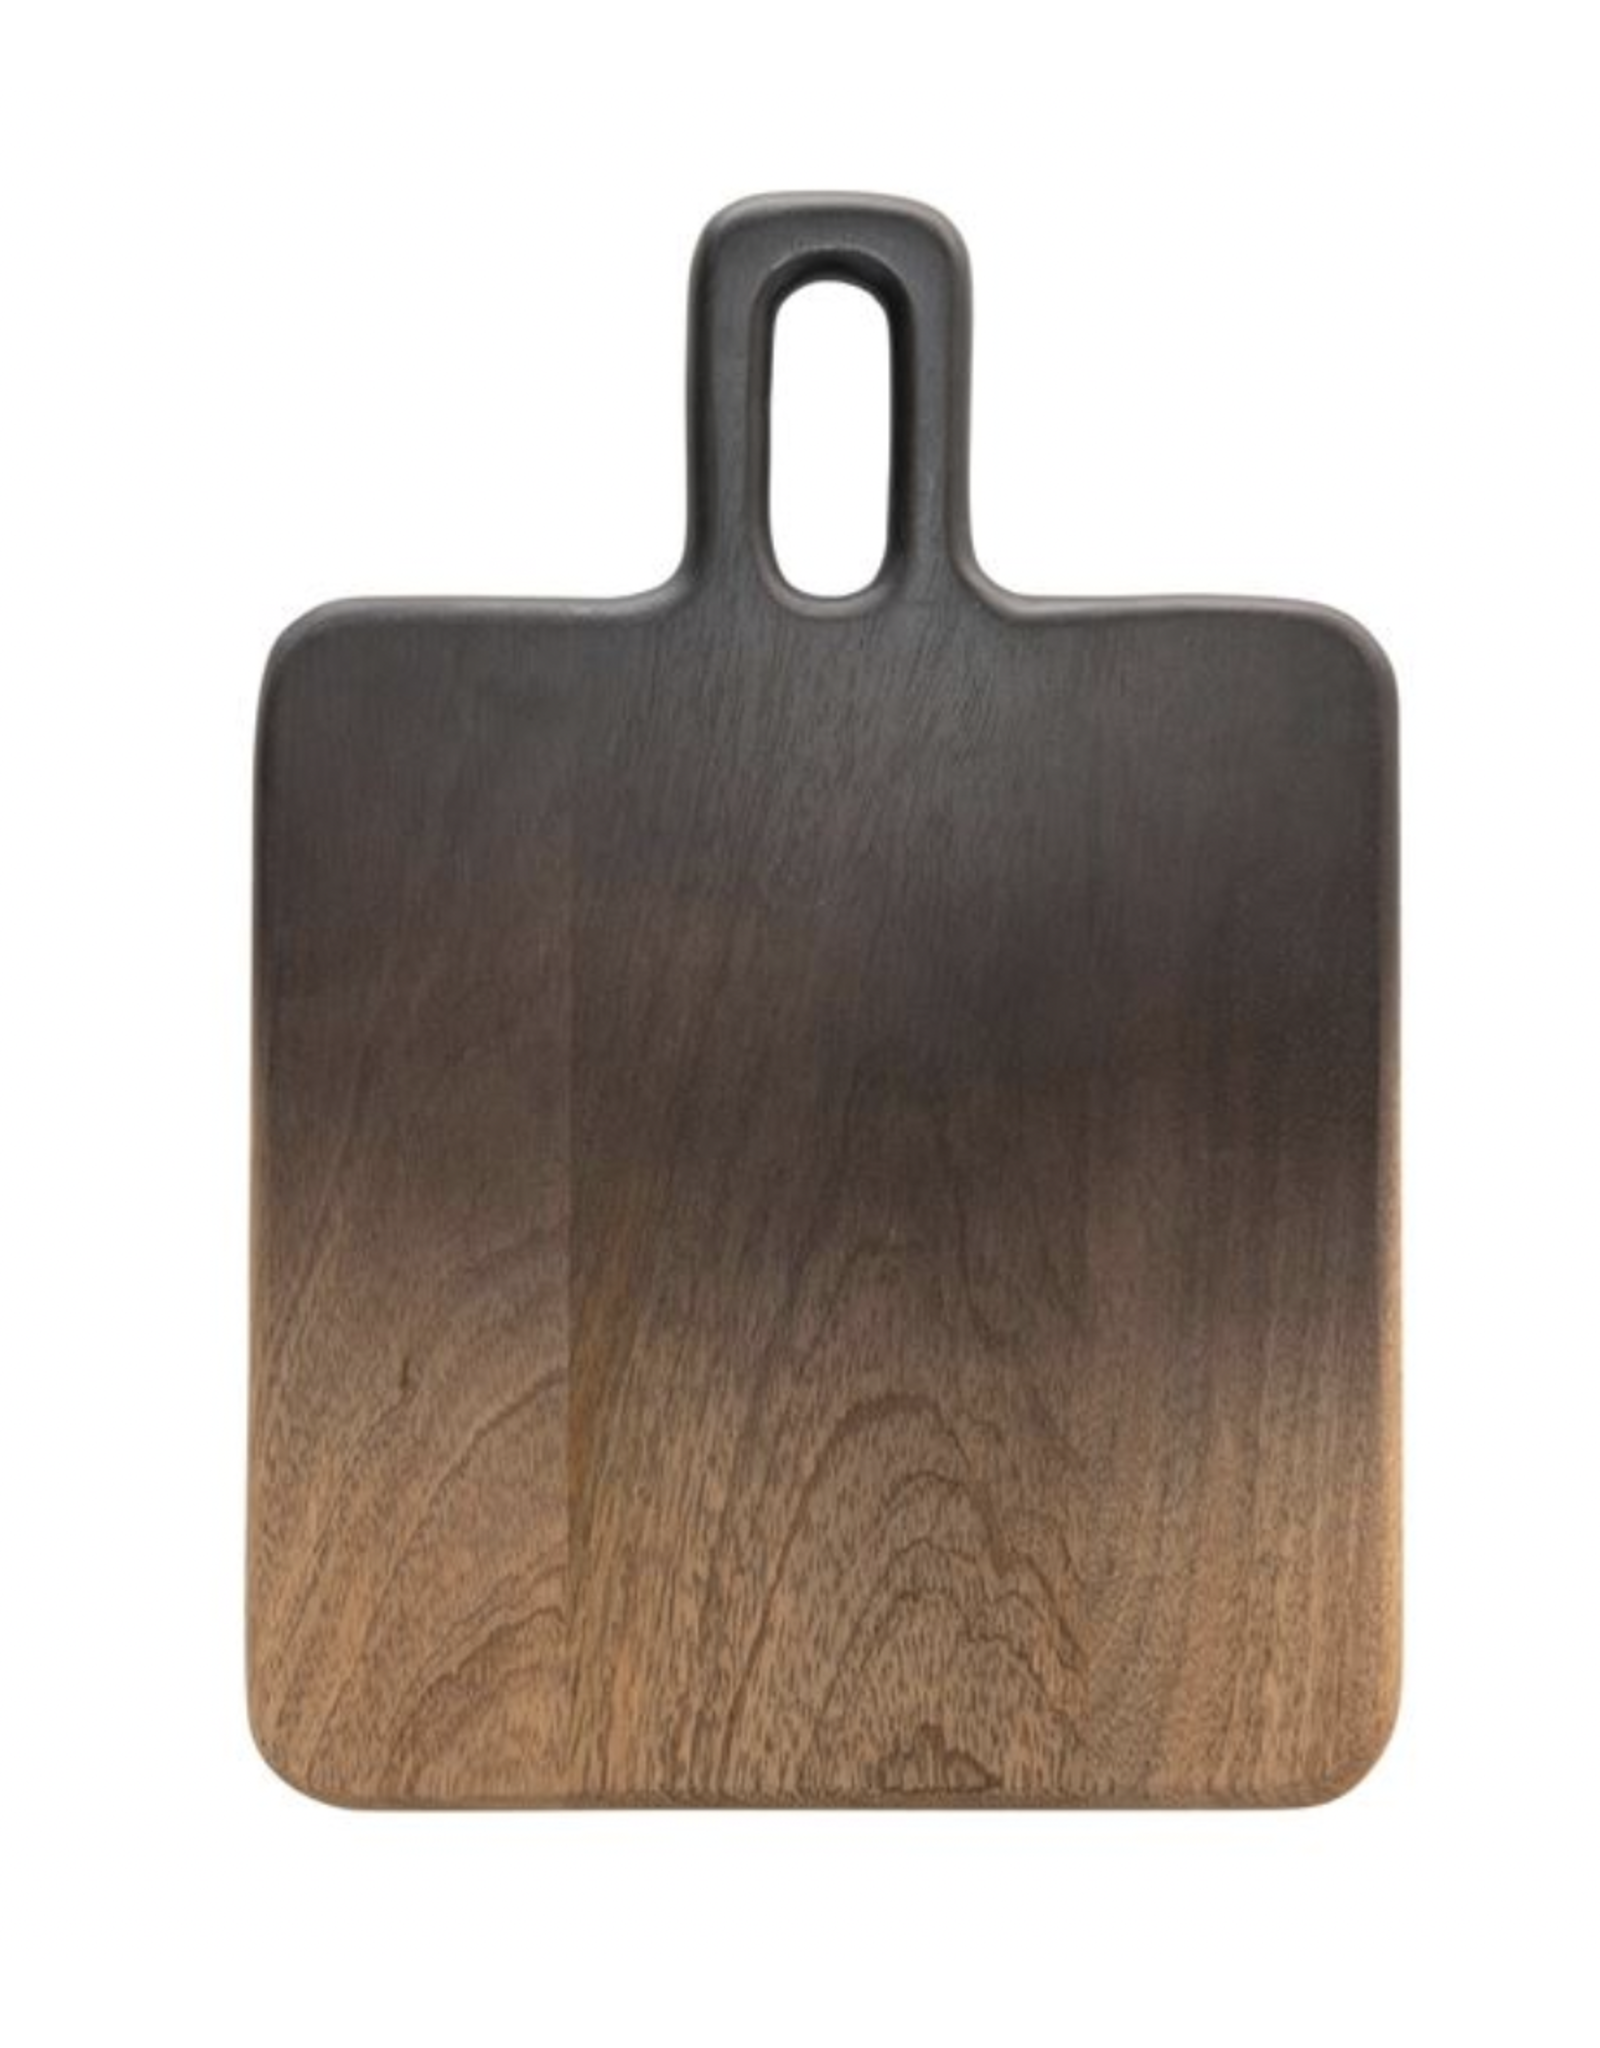 Bloomingville Mango Wood Cheese/Cutting Board, Black & Natural Ombre 14" x 10"